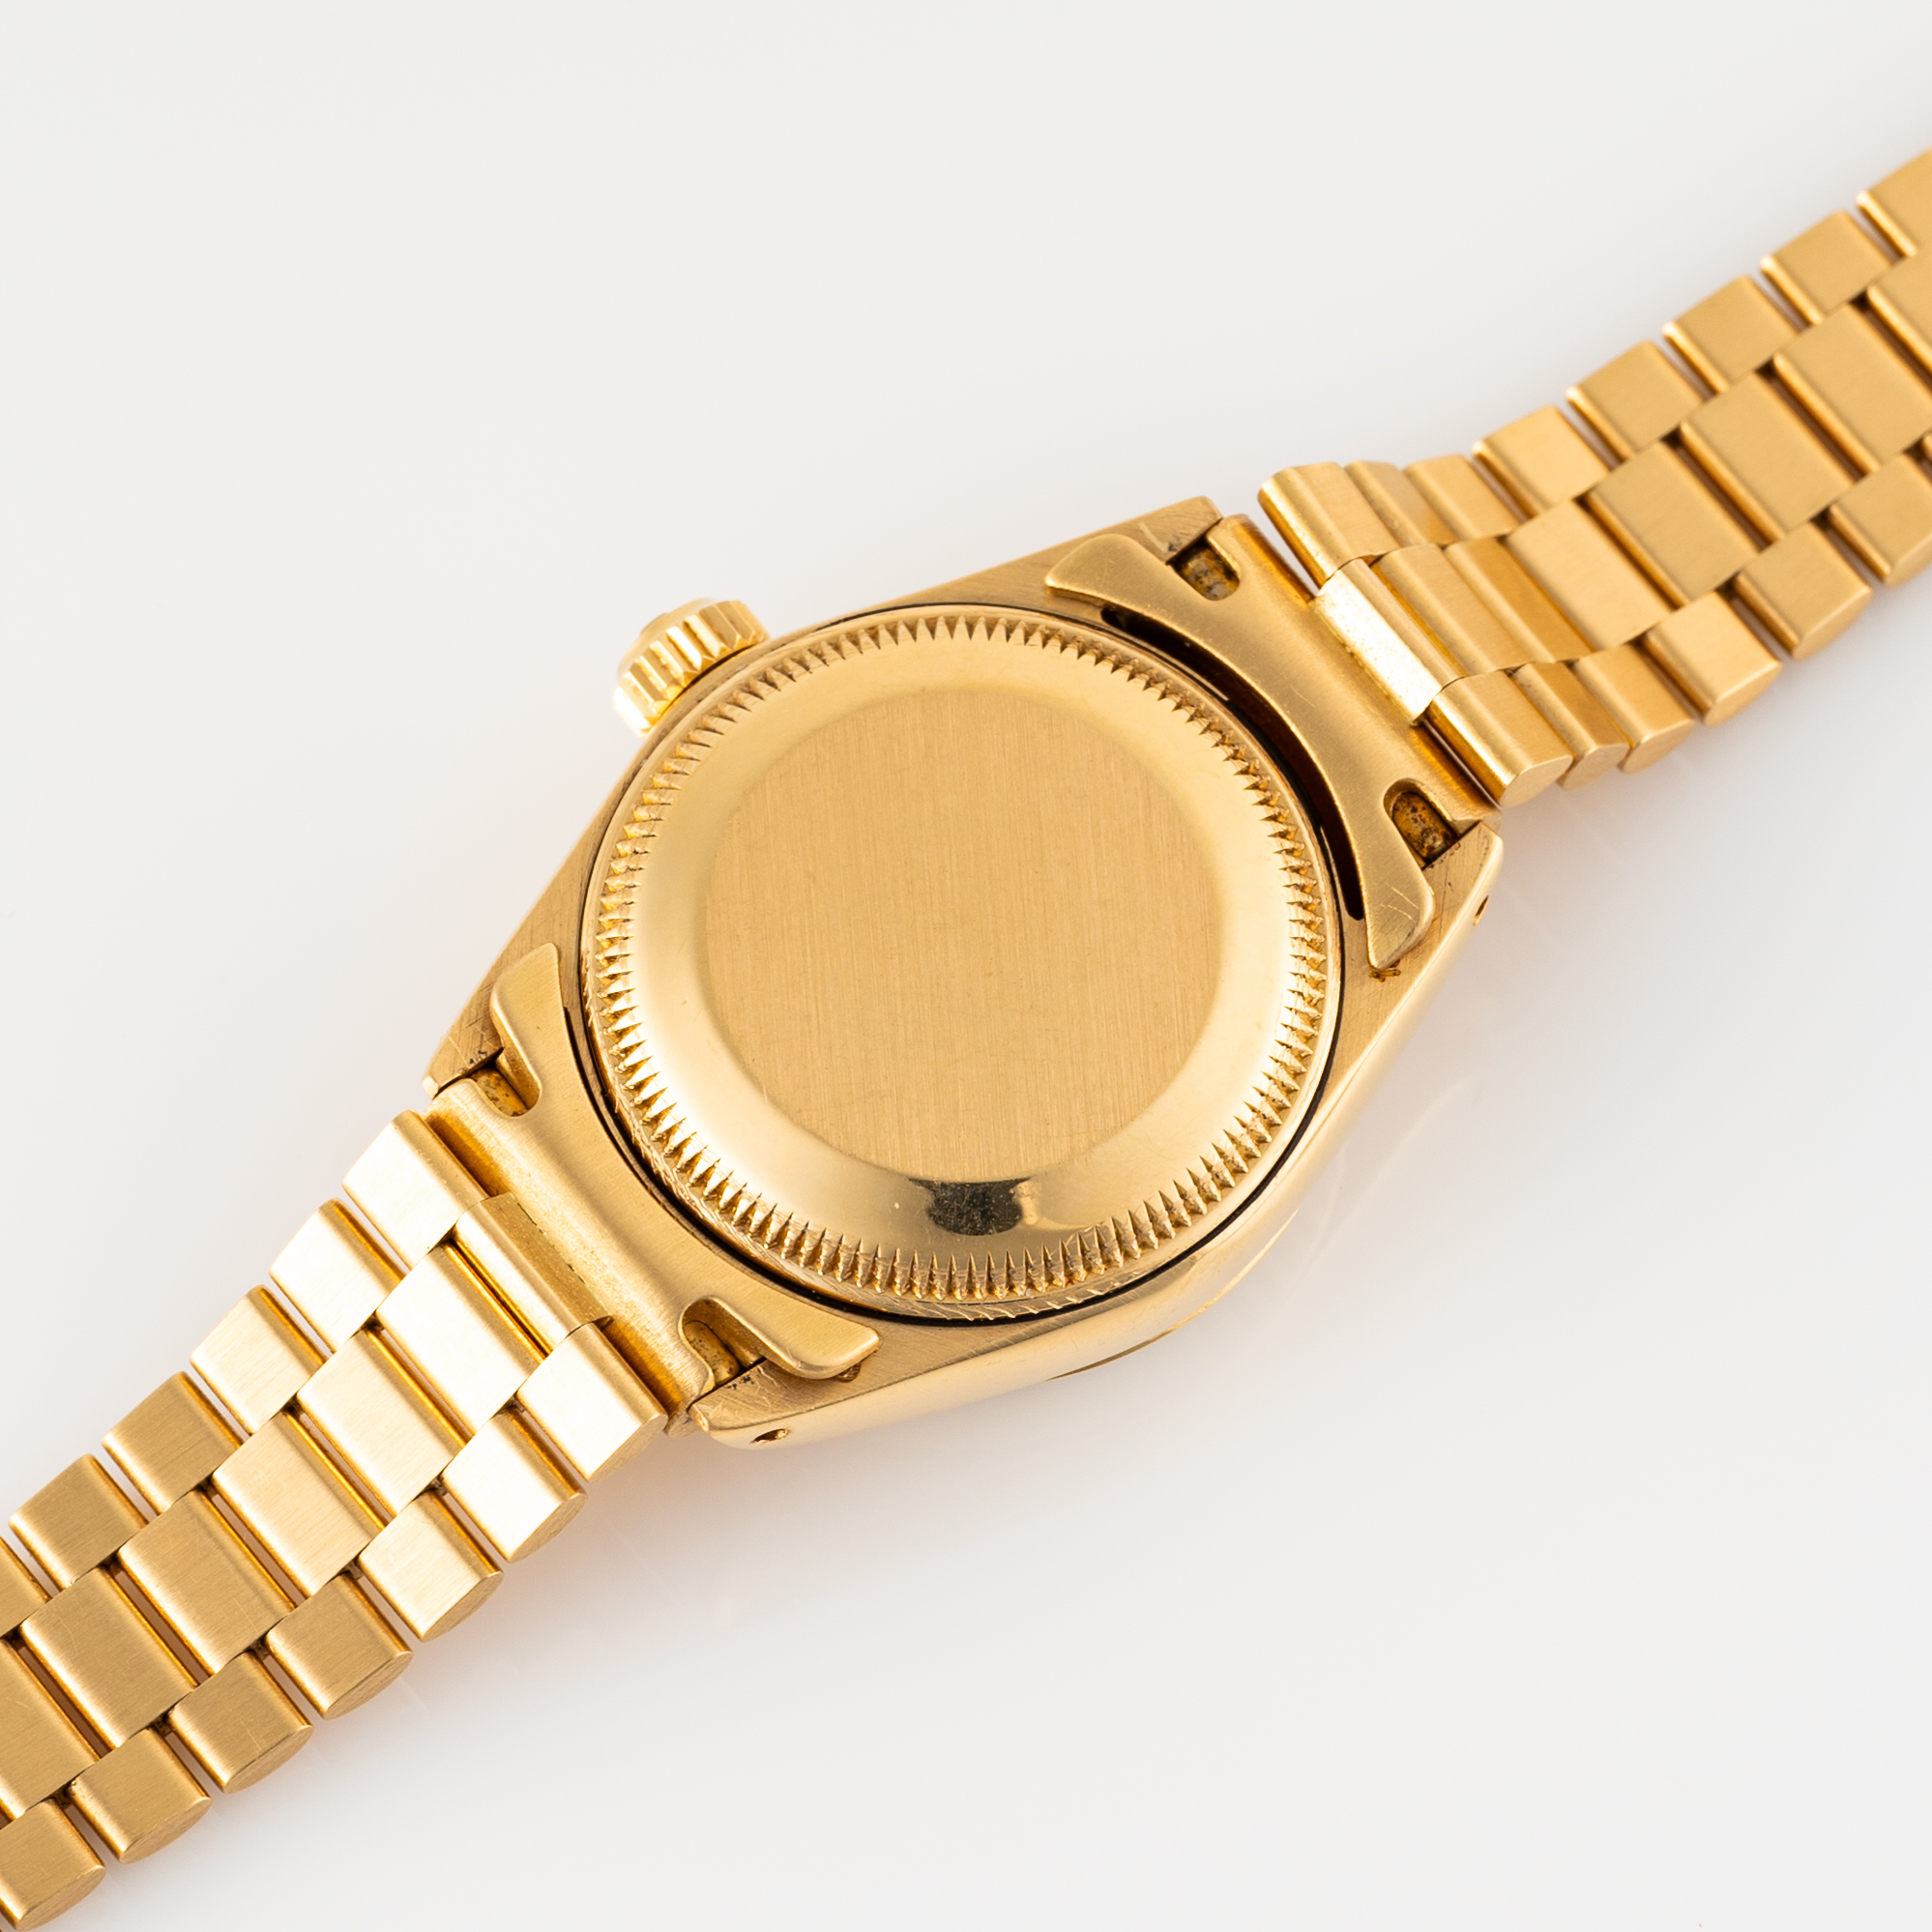 A LADY'S 18K SOLID GOLD ROLEX OYSTER PERPETUAL DATEJUST BRACELET WATCH CIRCA 1979, REF. 6917/8 - Image 7 of 9